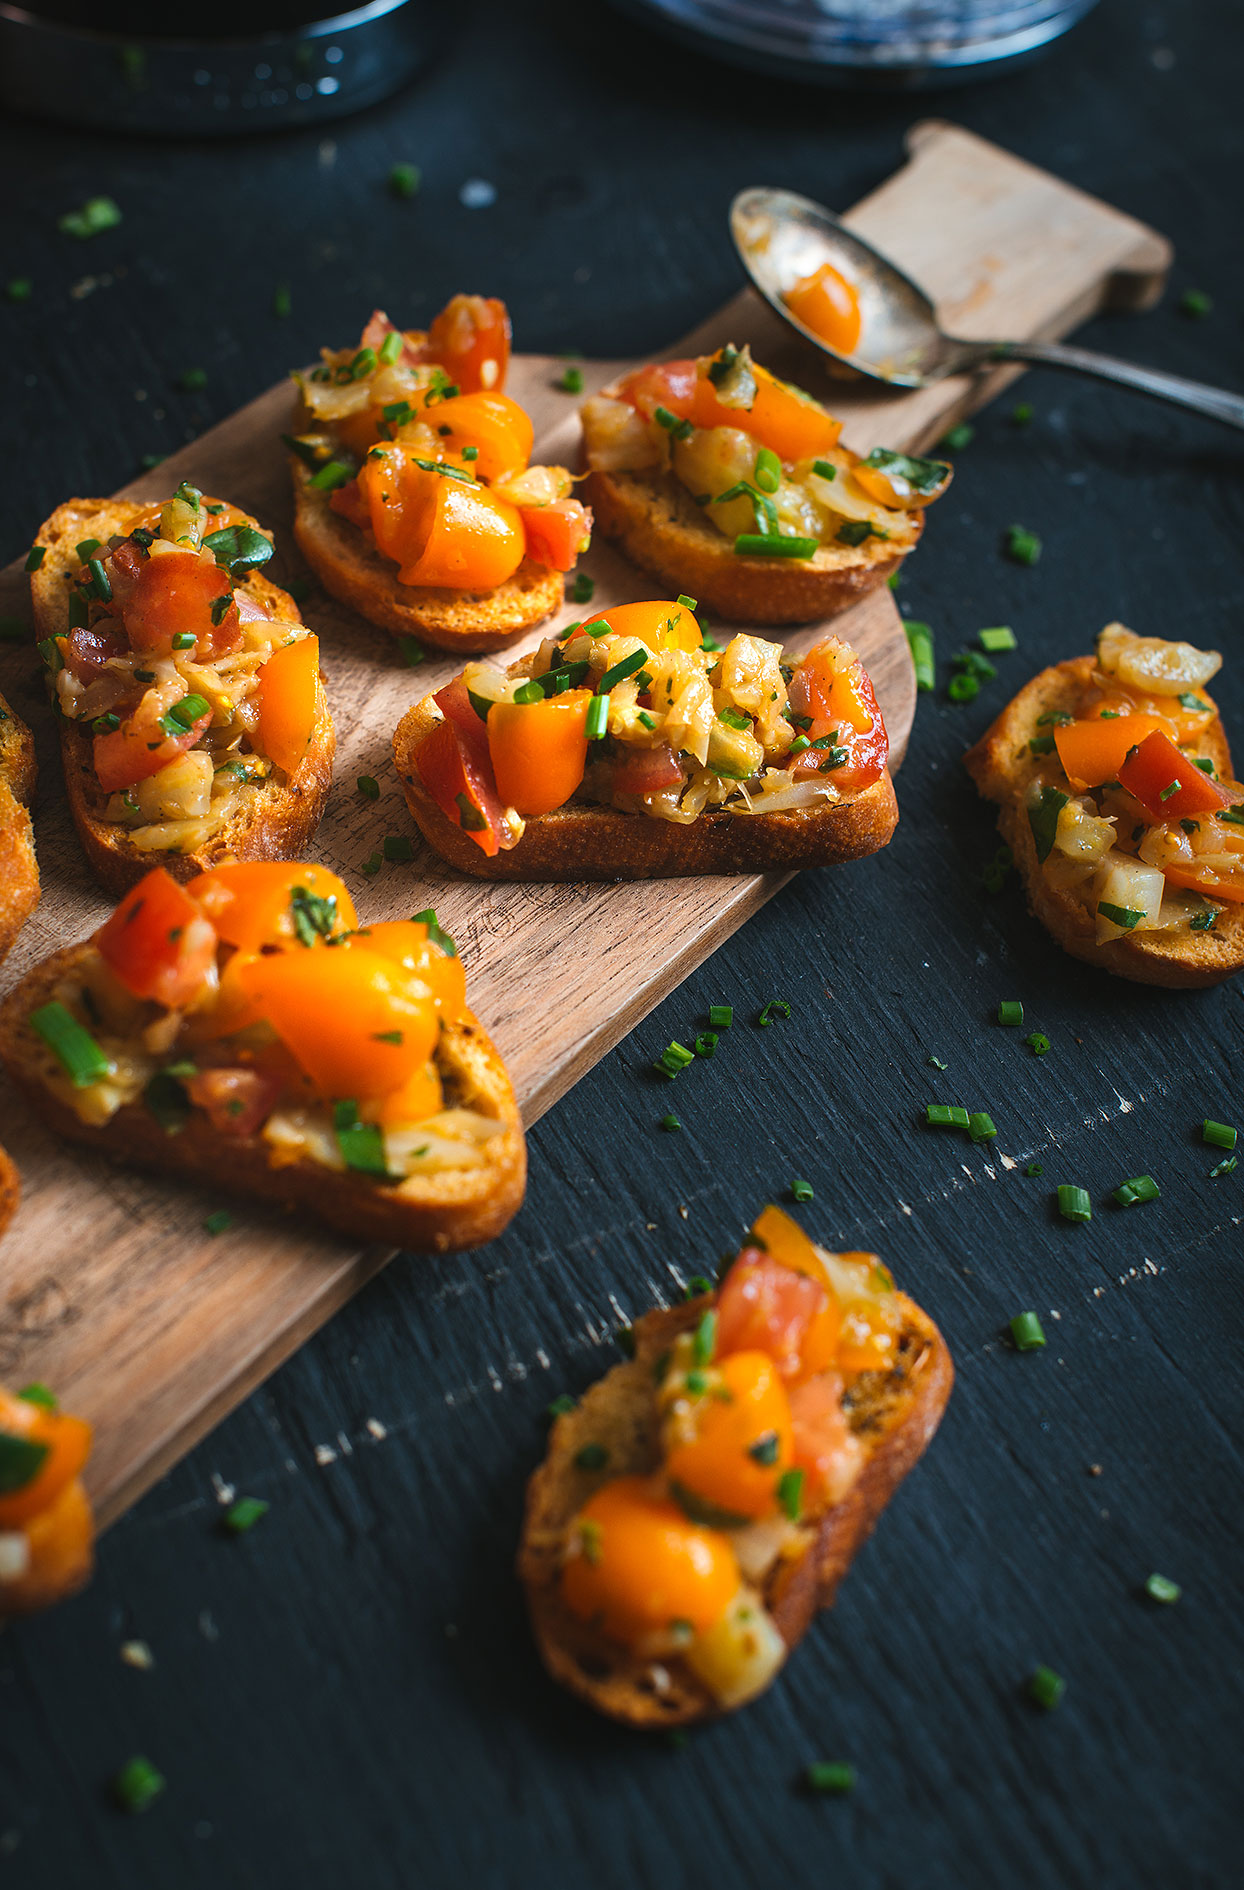 Bruschetta with tomato and white beer caramelized fennel